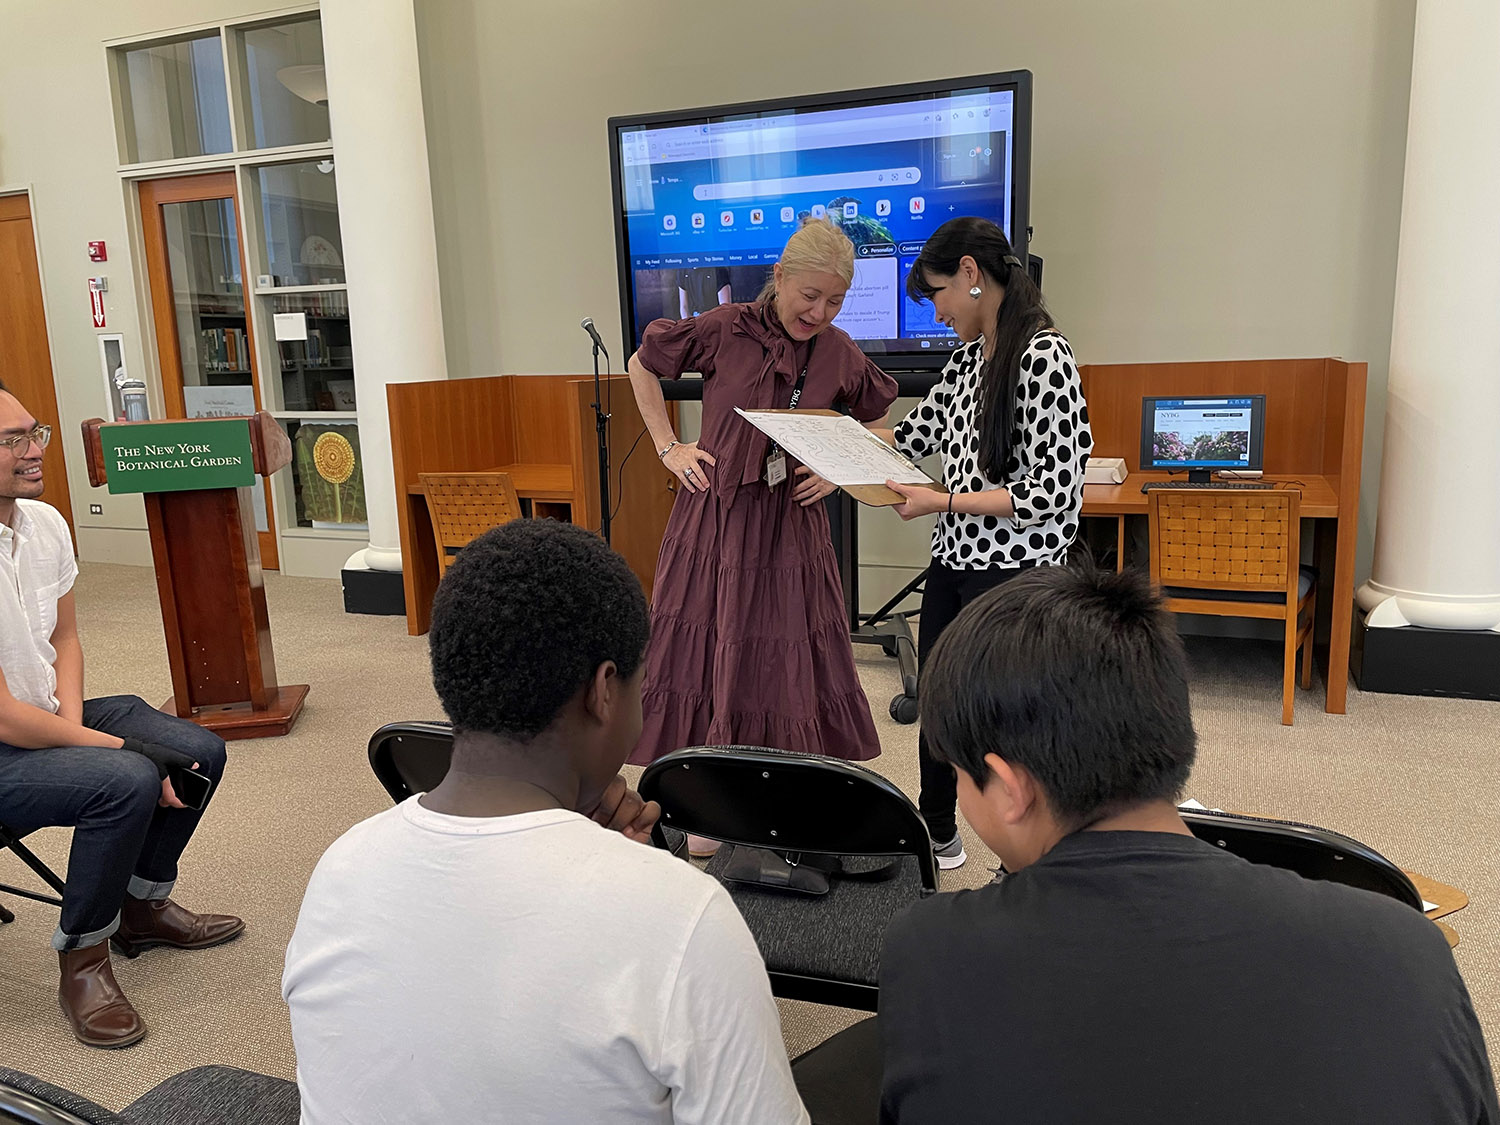 A class of middle school students takes part in a workshop inside a library